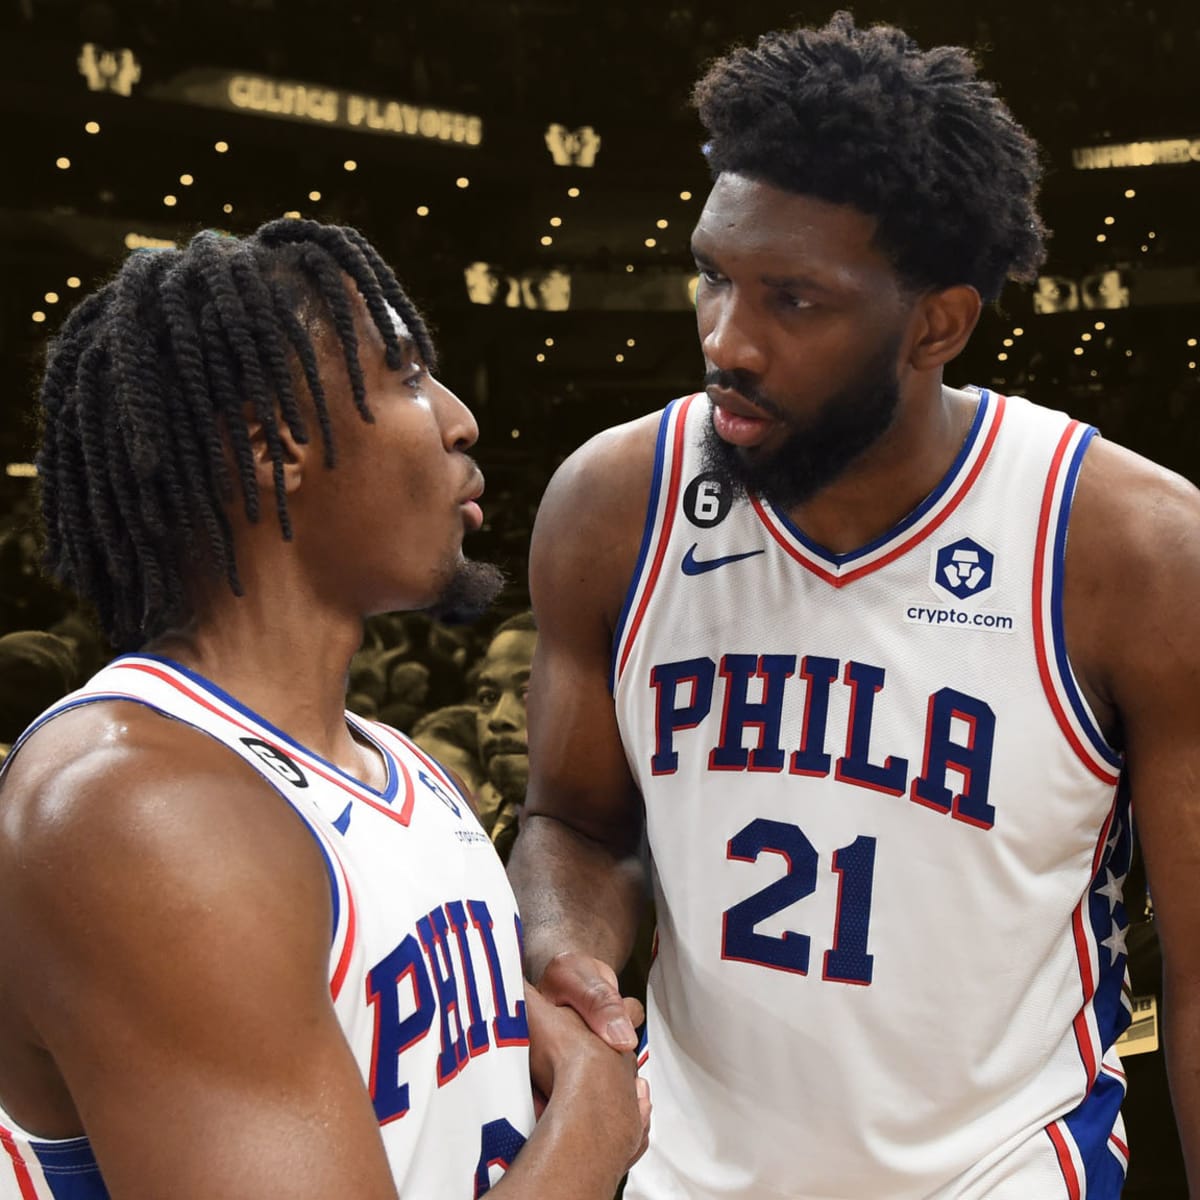 Philadelphia 76ers fans like what they've seen from rookie Tyrese